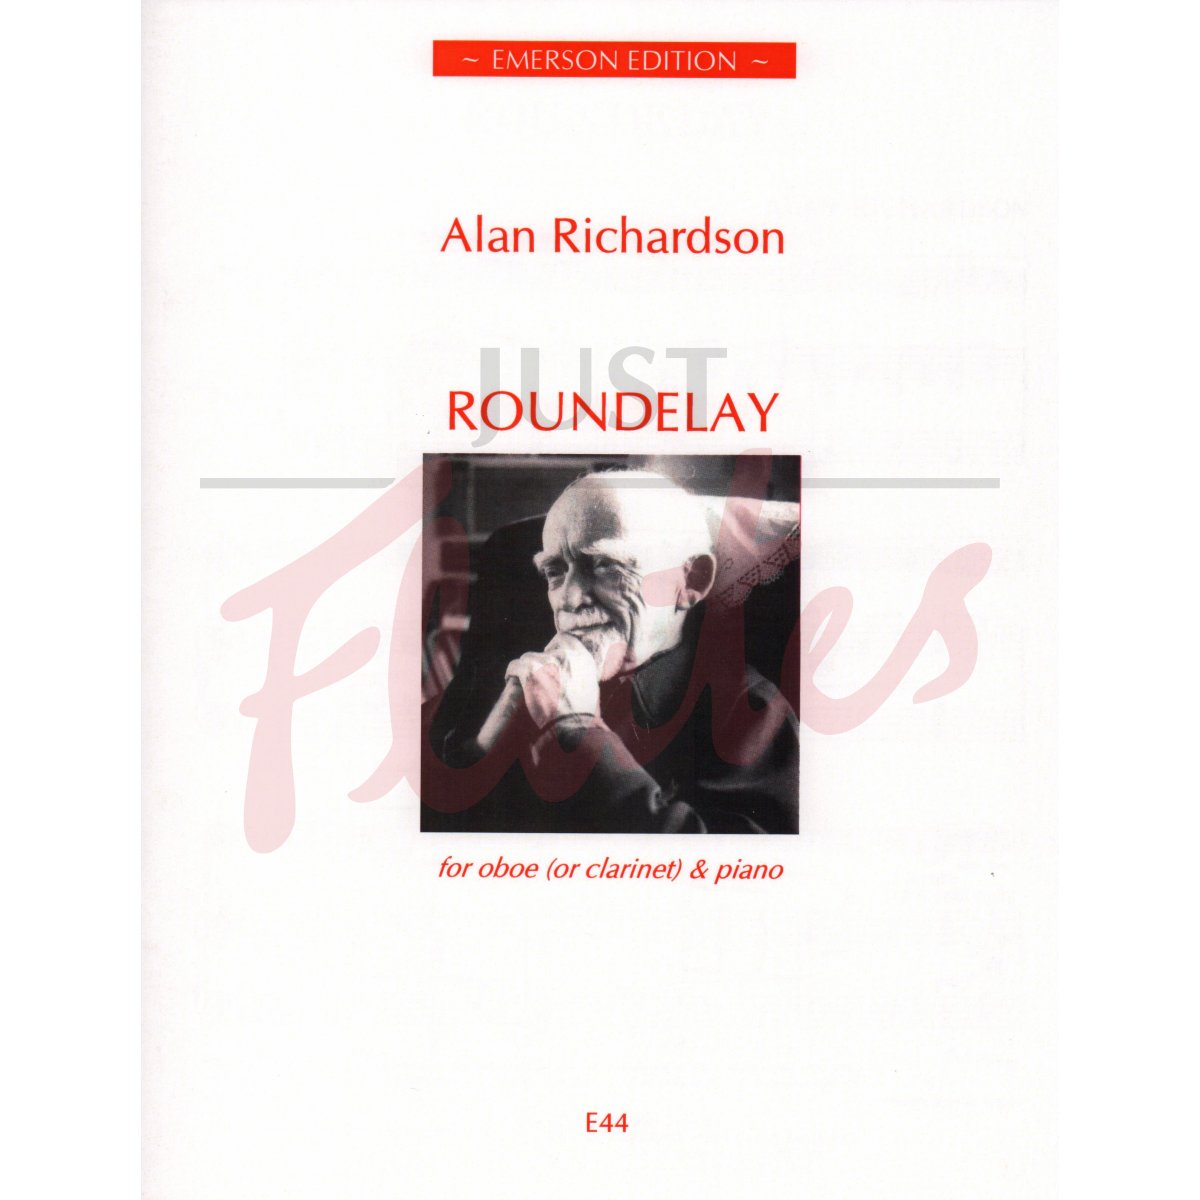 Roundelay for Oboe (or Clarinet) and Piano